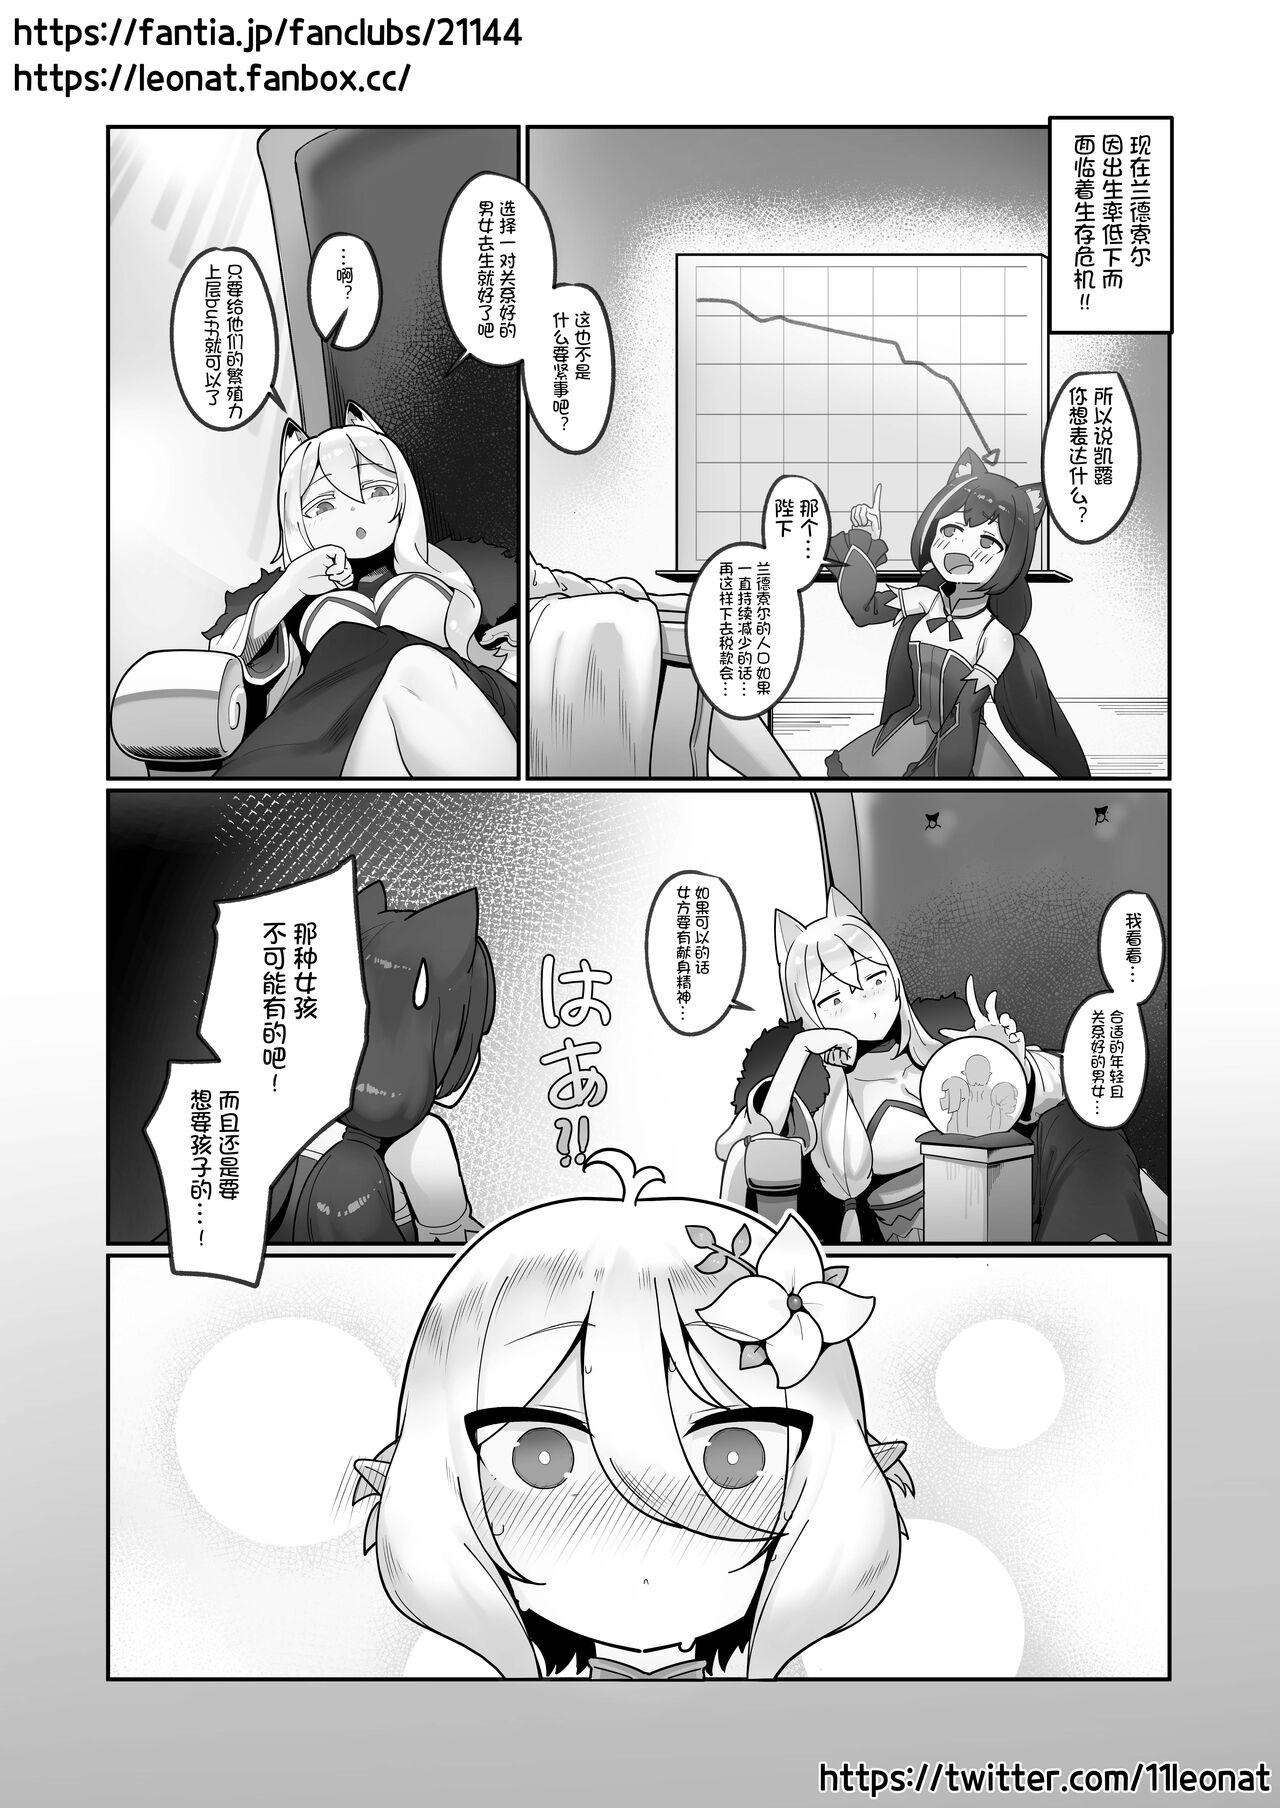 Friends 私と主さまの妊活日誌 - Princess connect Ejaculations - Page 7